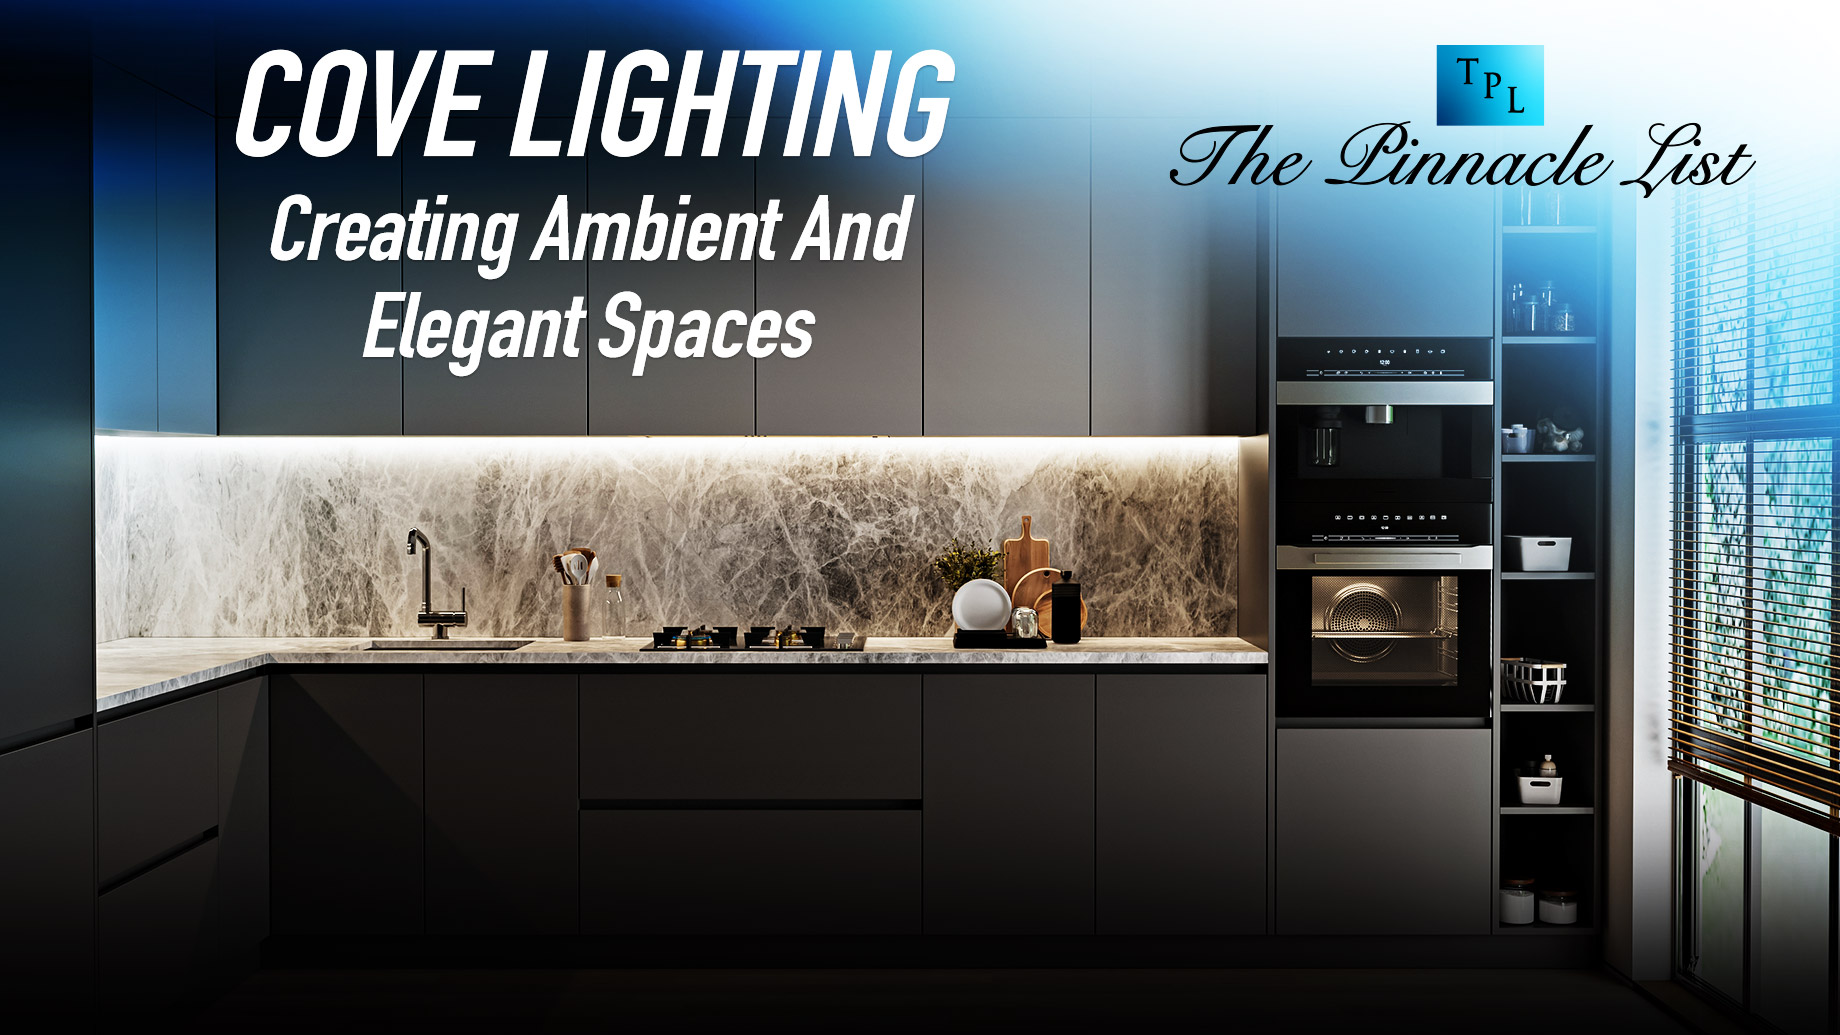 Cove Lighting: Creating Ambient And Elegant Spaces